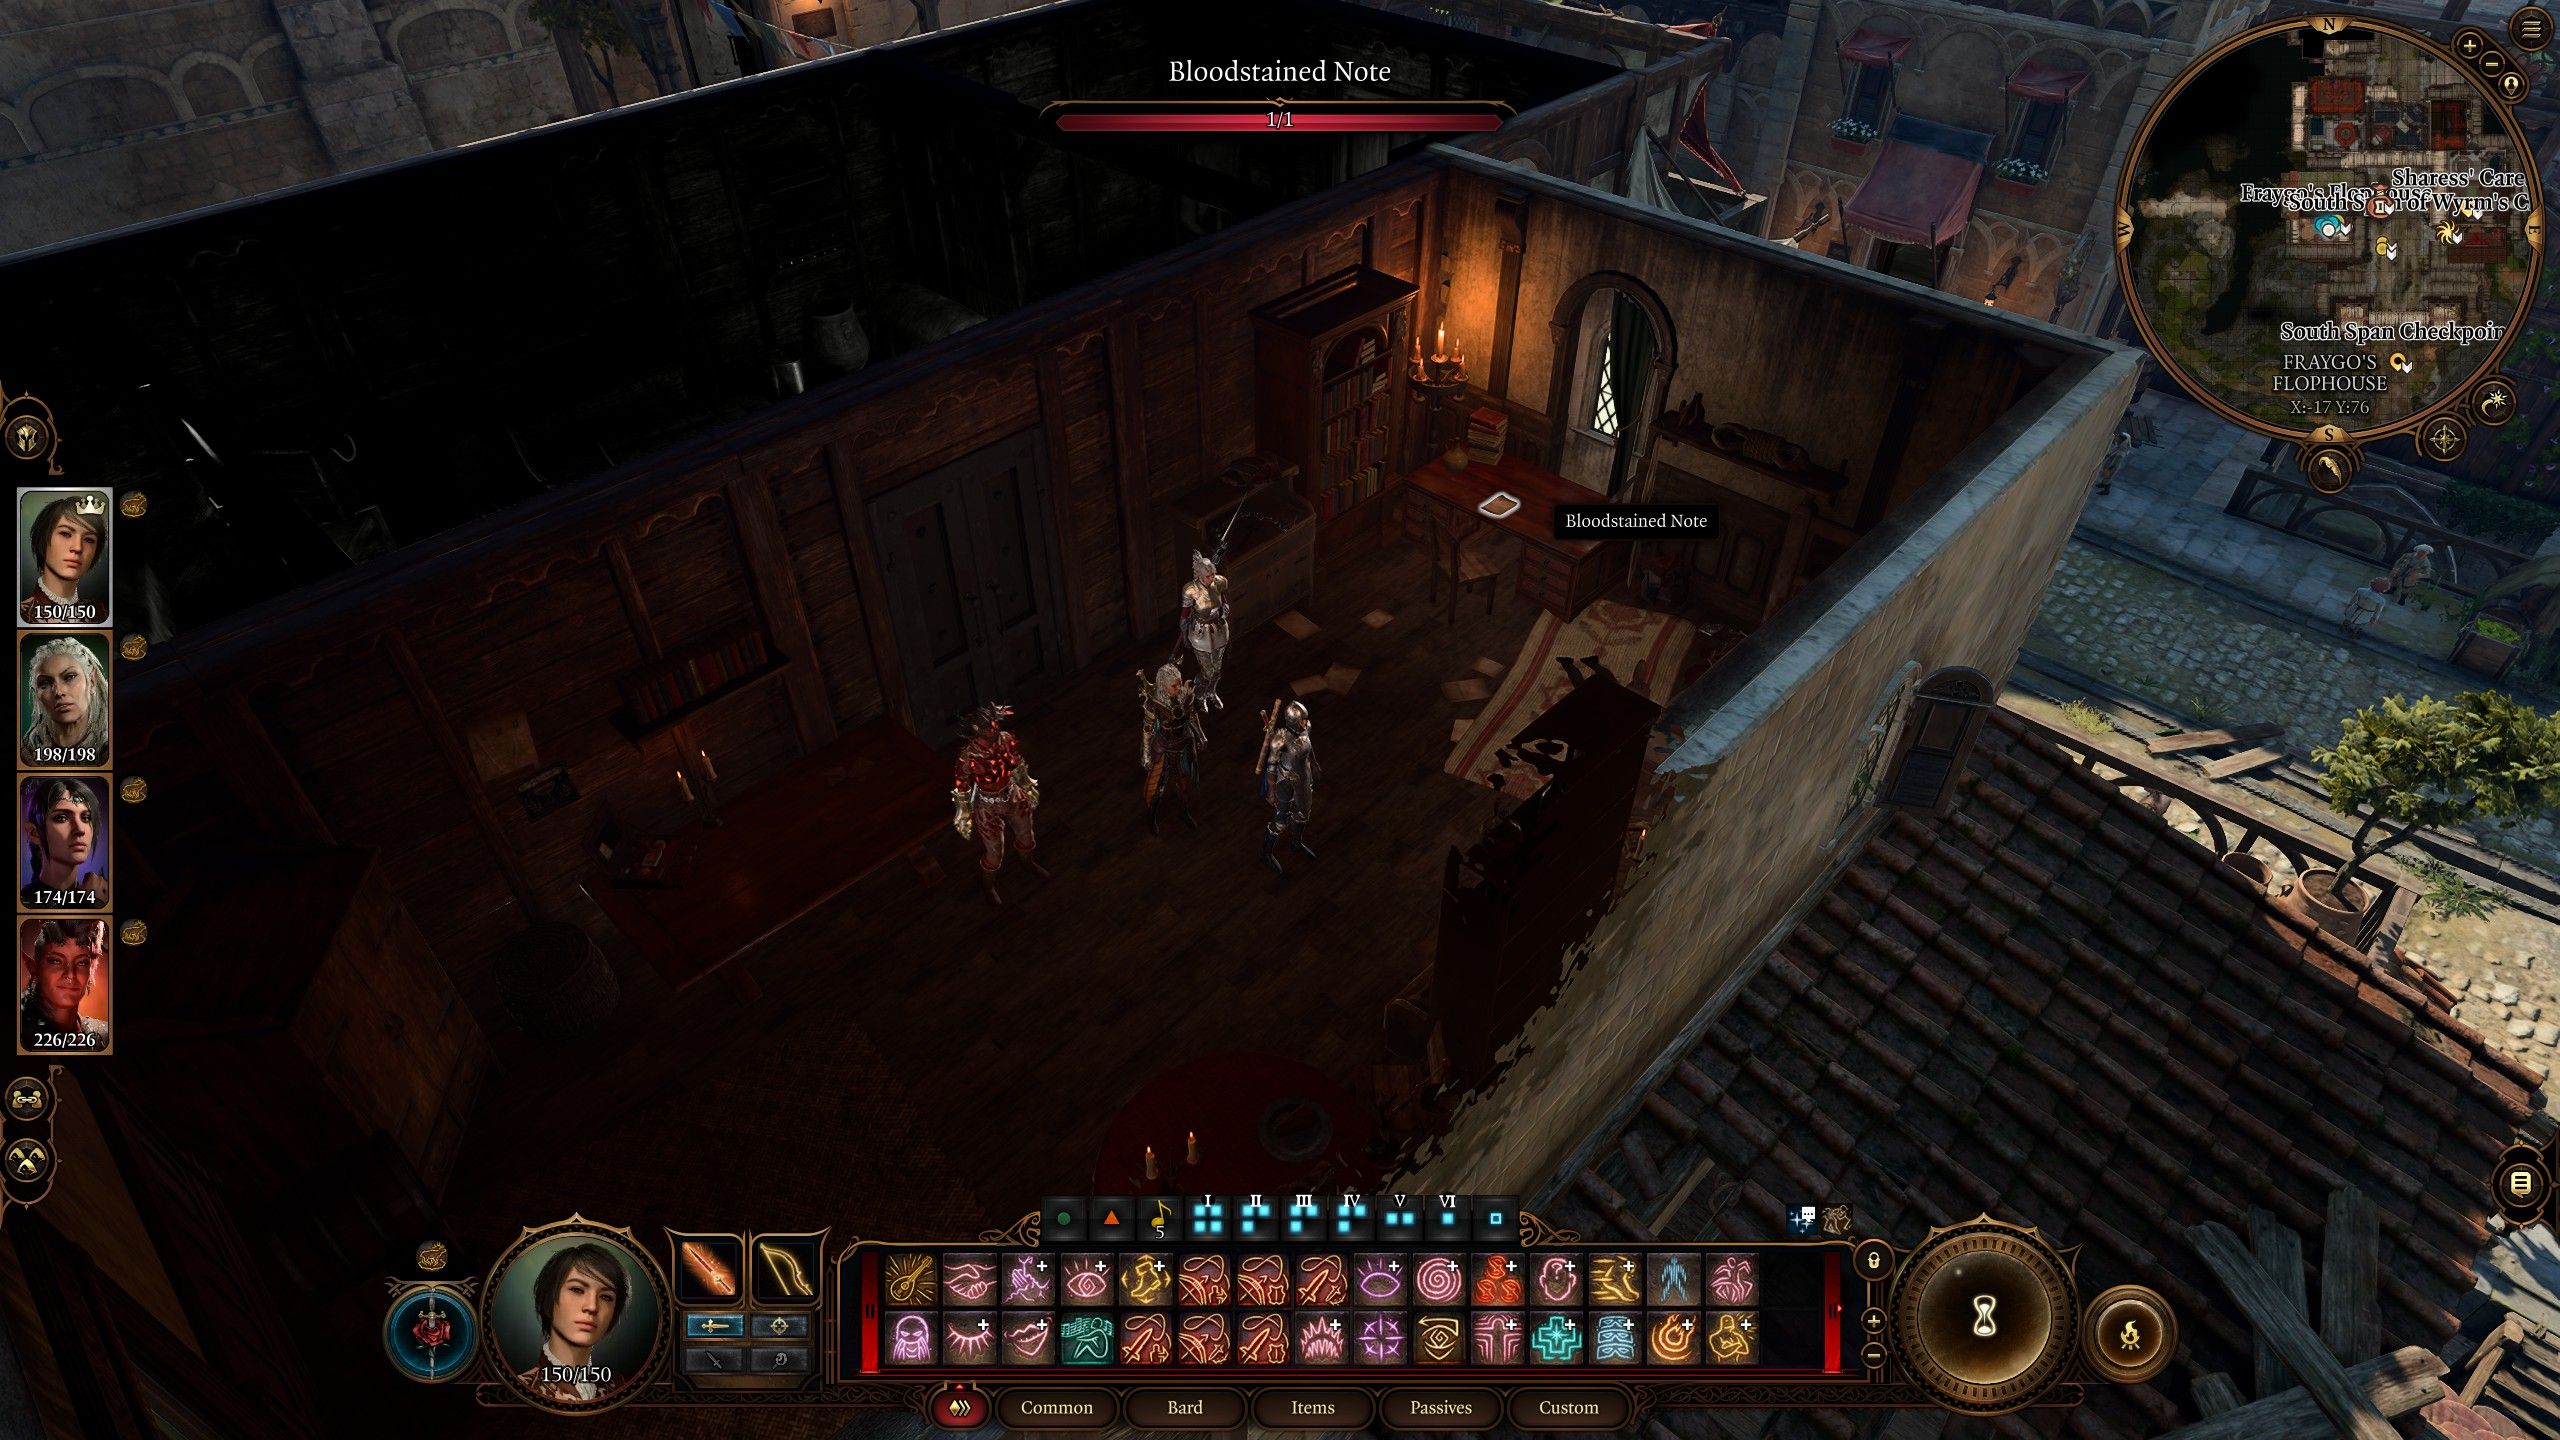 Baldur's Gate 3 Player And Party Uncovering Open Hand Temple Murder Evidence In Fraygo's Flophouse Attic Room